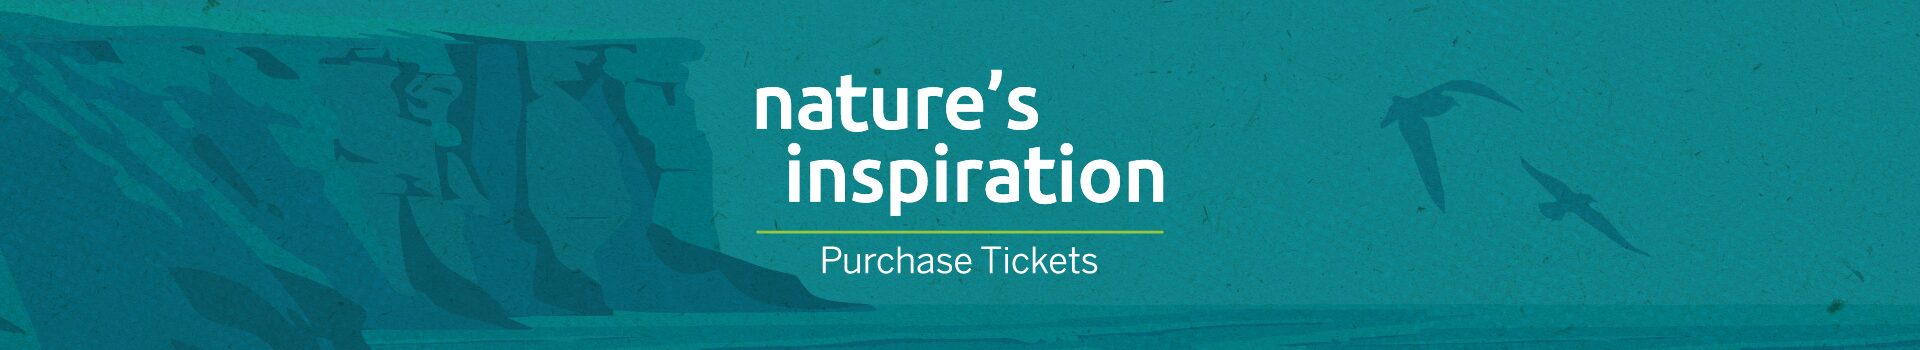 Nature's Inspiration "purchase tickets" banner 2024 with background image of the coast